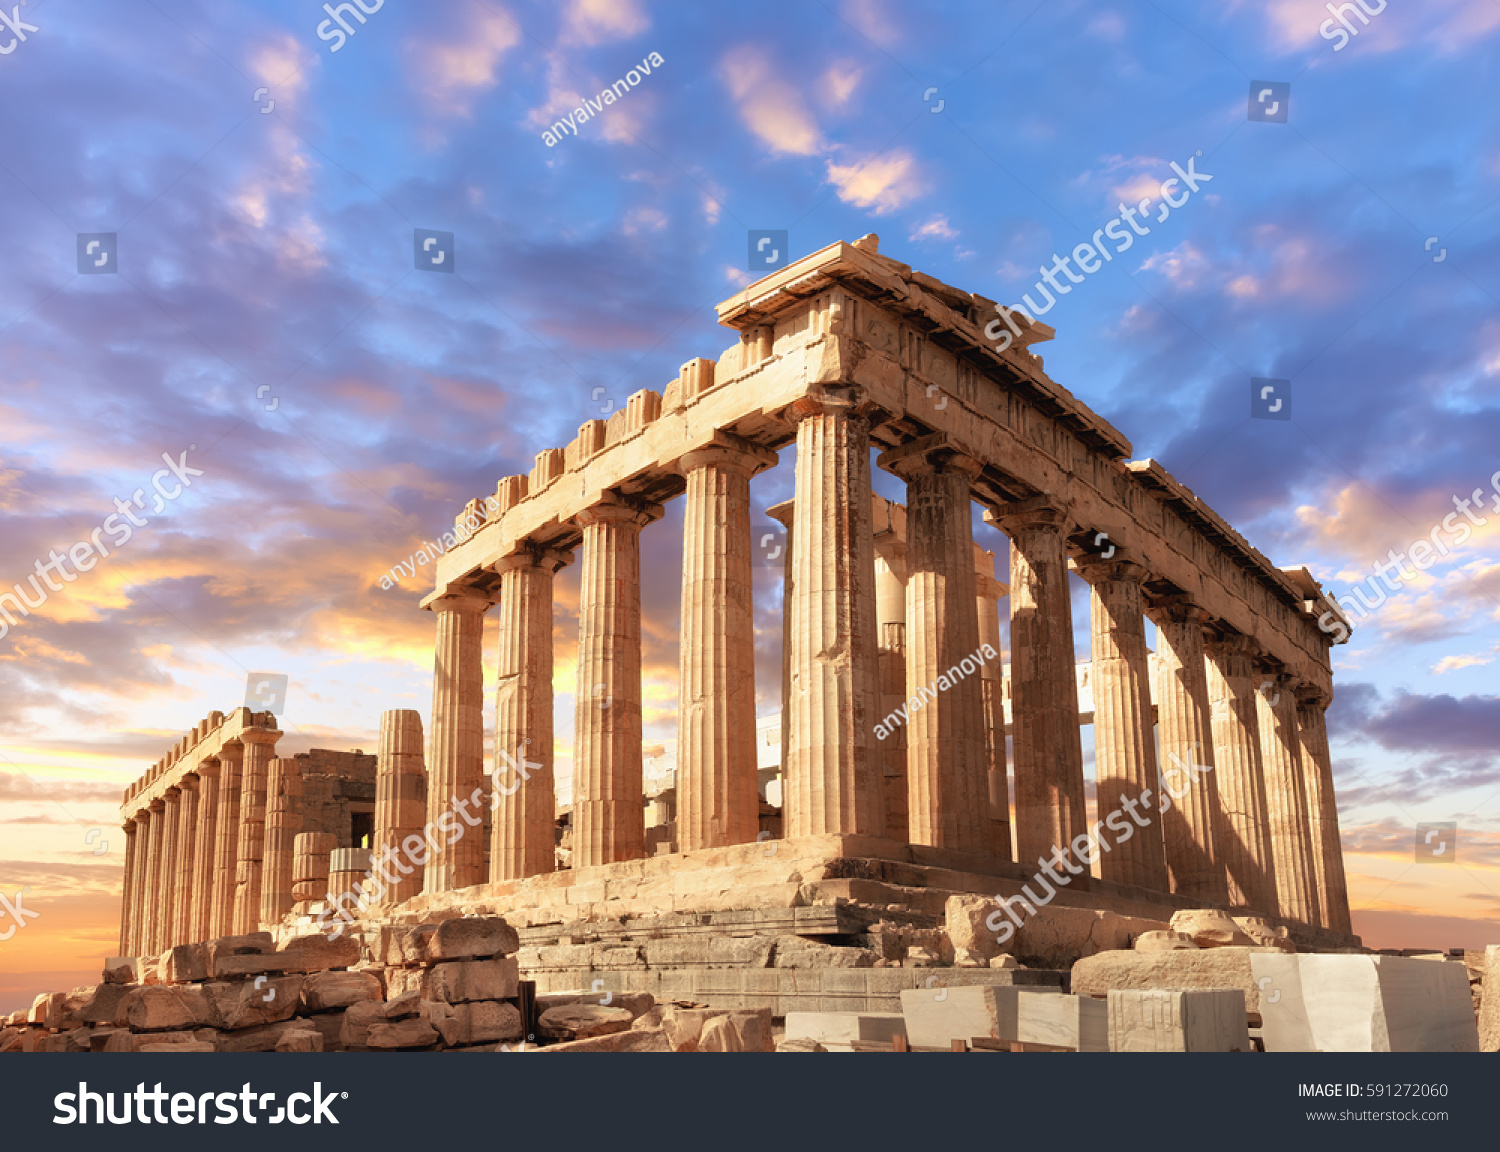 Parthenon temple on a sinset. Acropolis in Athens, Greece, This picture is toned. #591272060